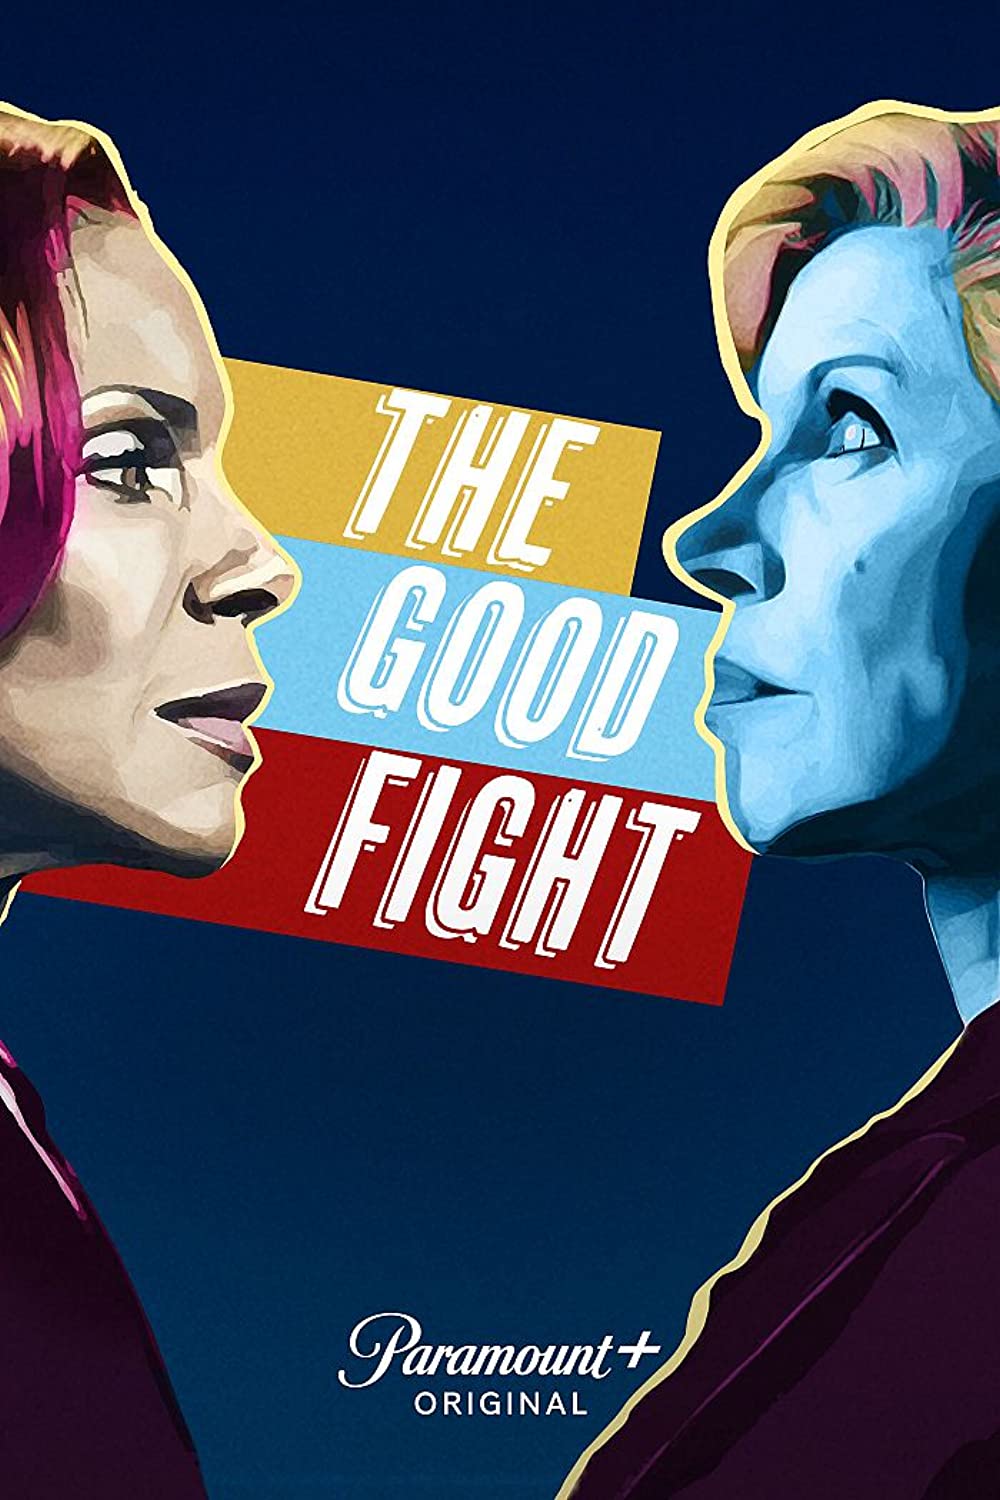 The Jury Has Reached A Verdict: Point Classics Track Placed in ‘The Good Fight’